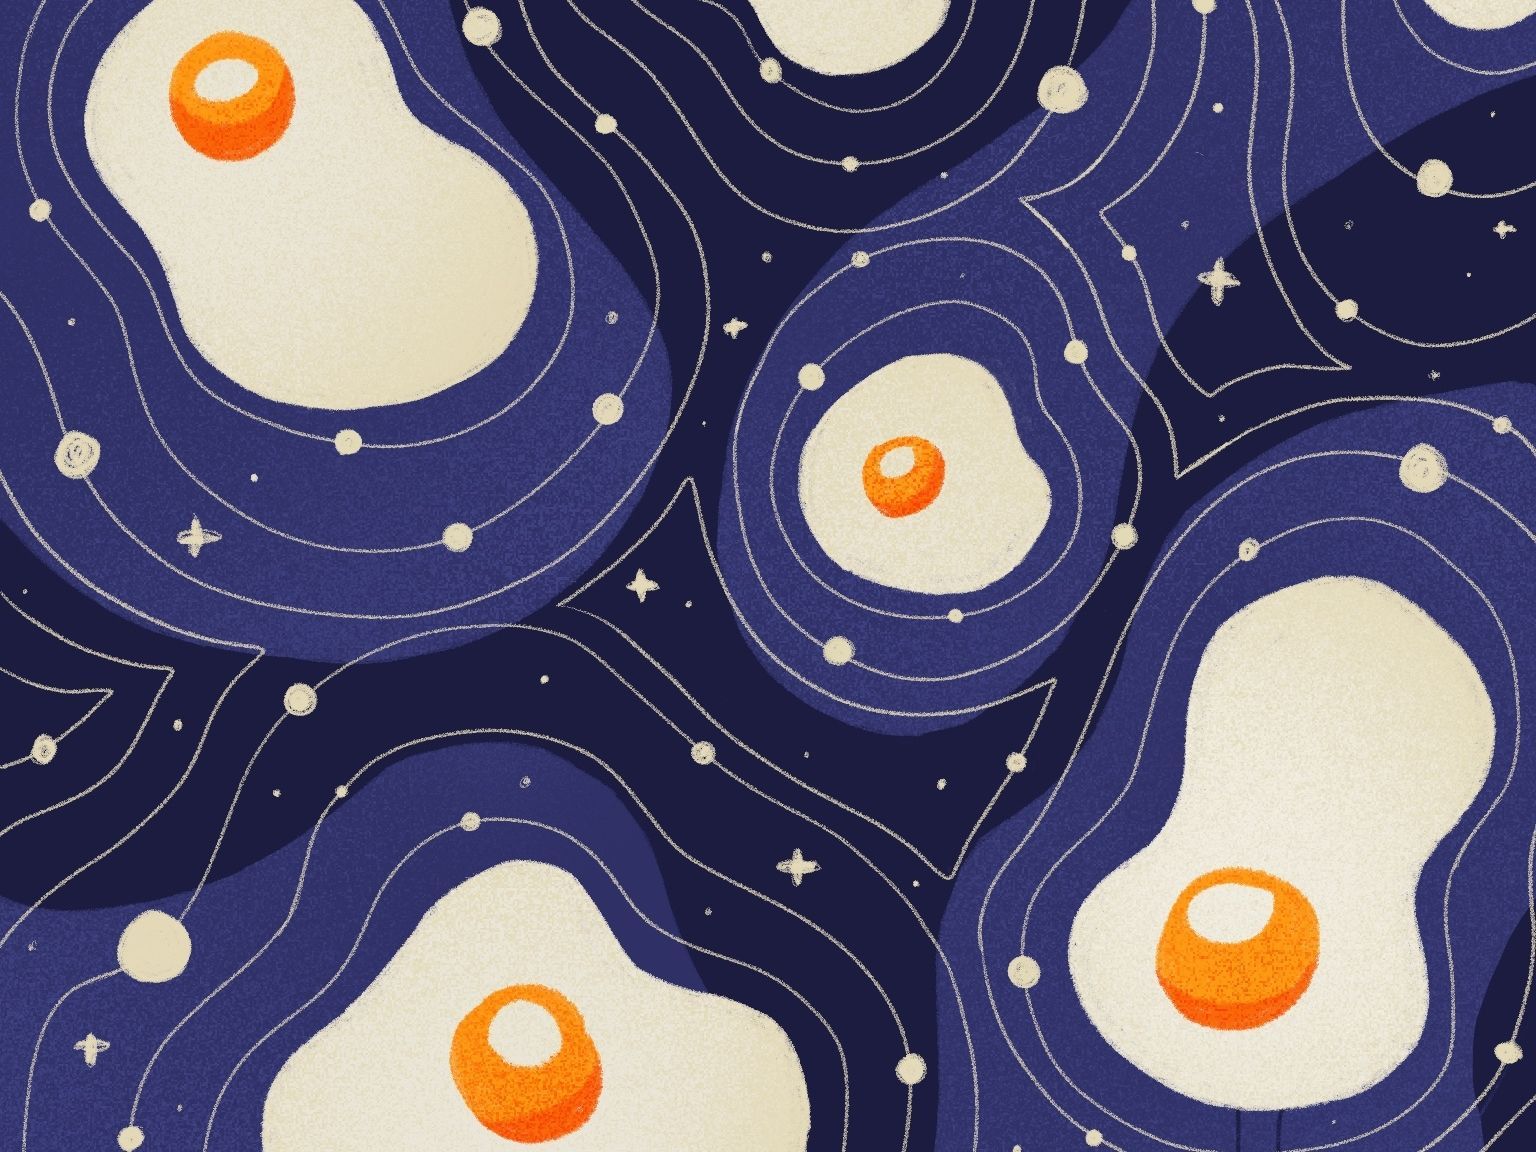 A pattern of fried eggs on a dark blue background - Egg